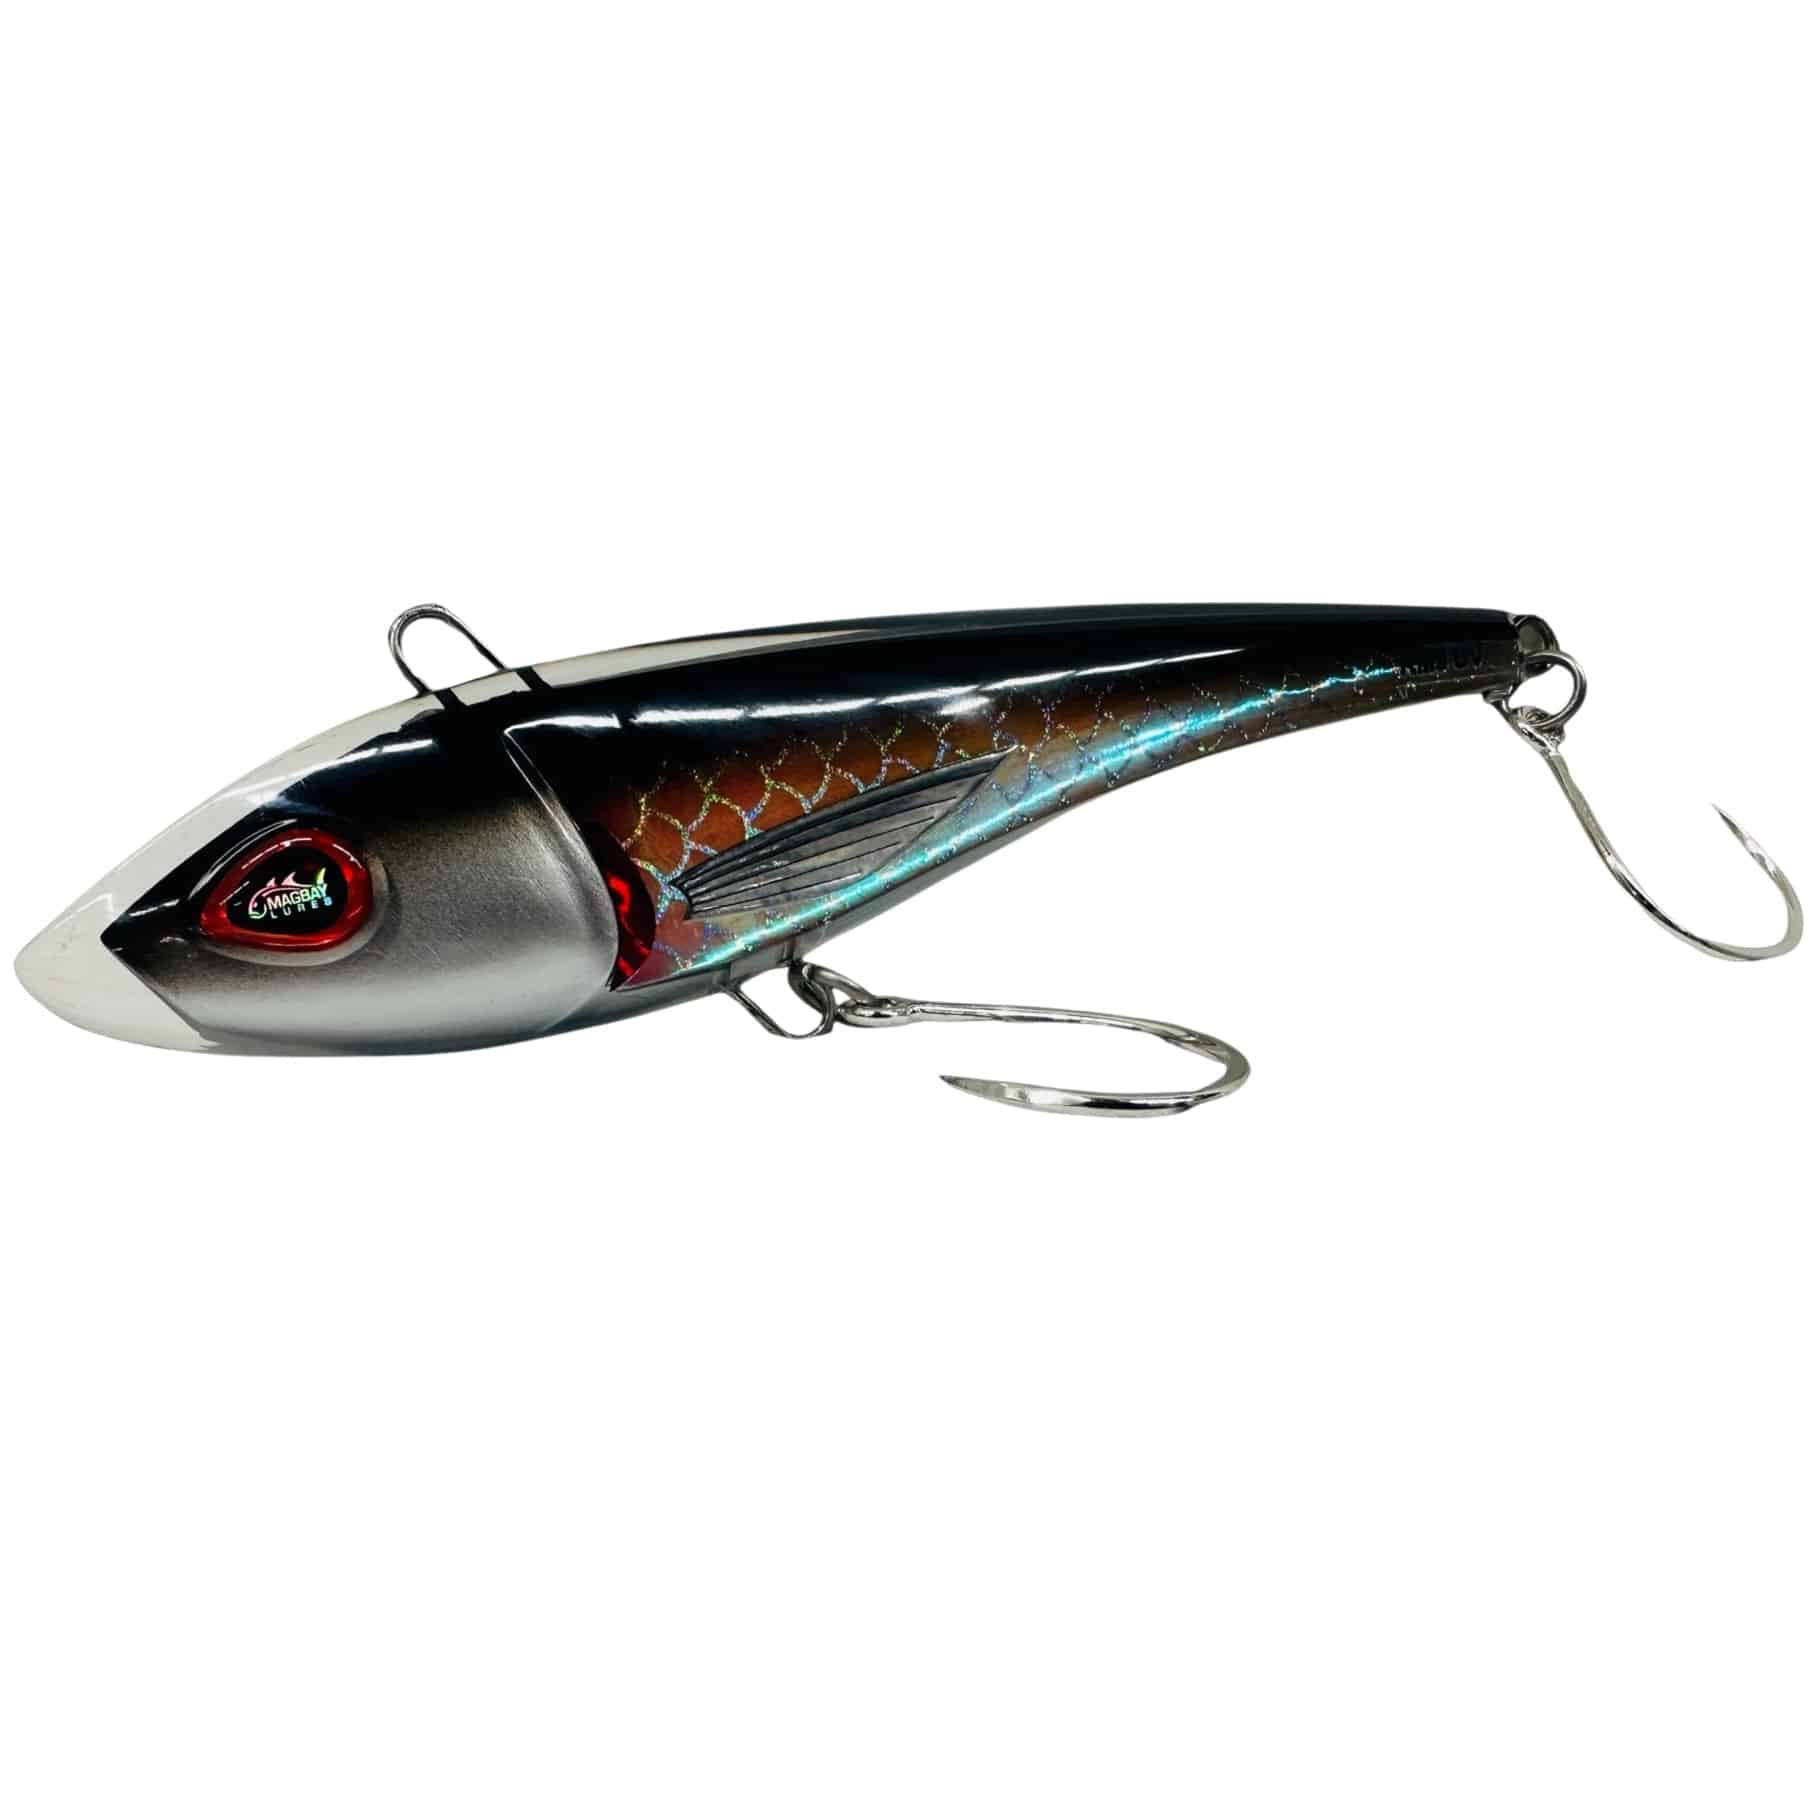 Topwater Diver Lure? This Thing Is Sick!